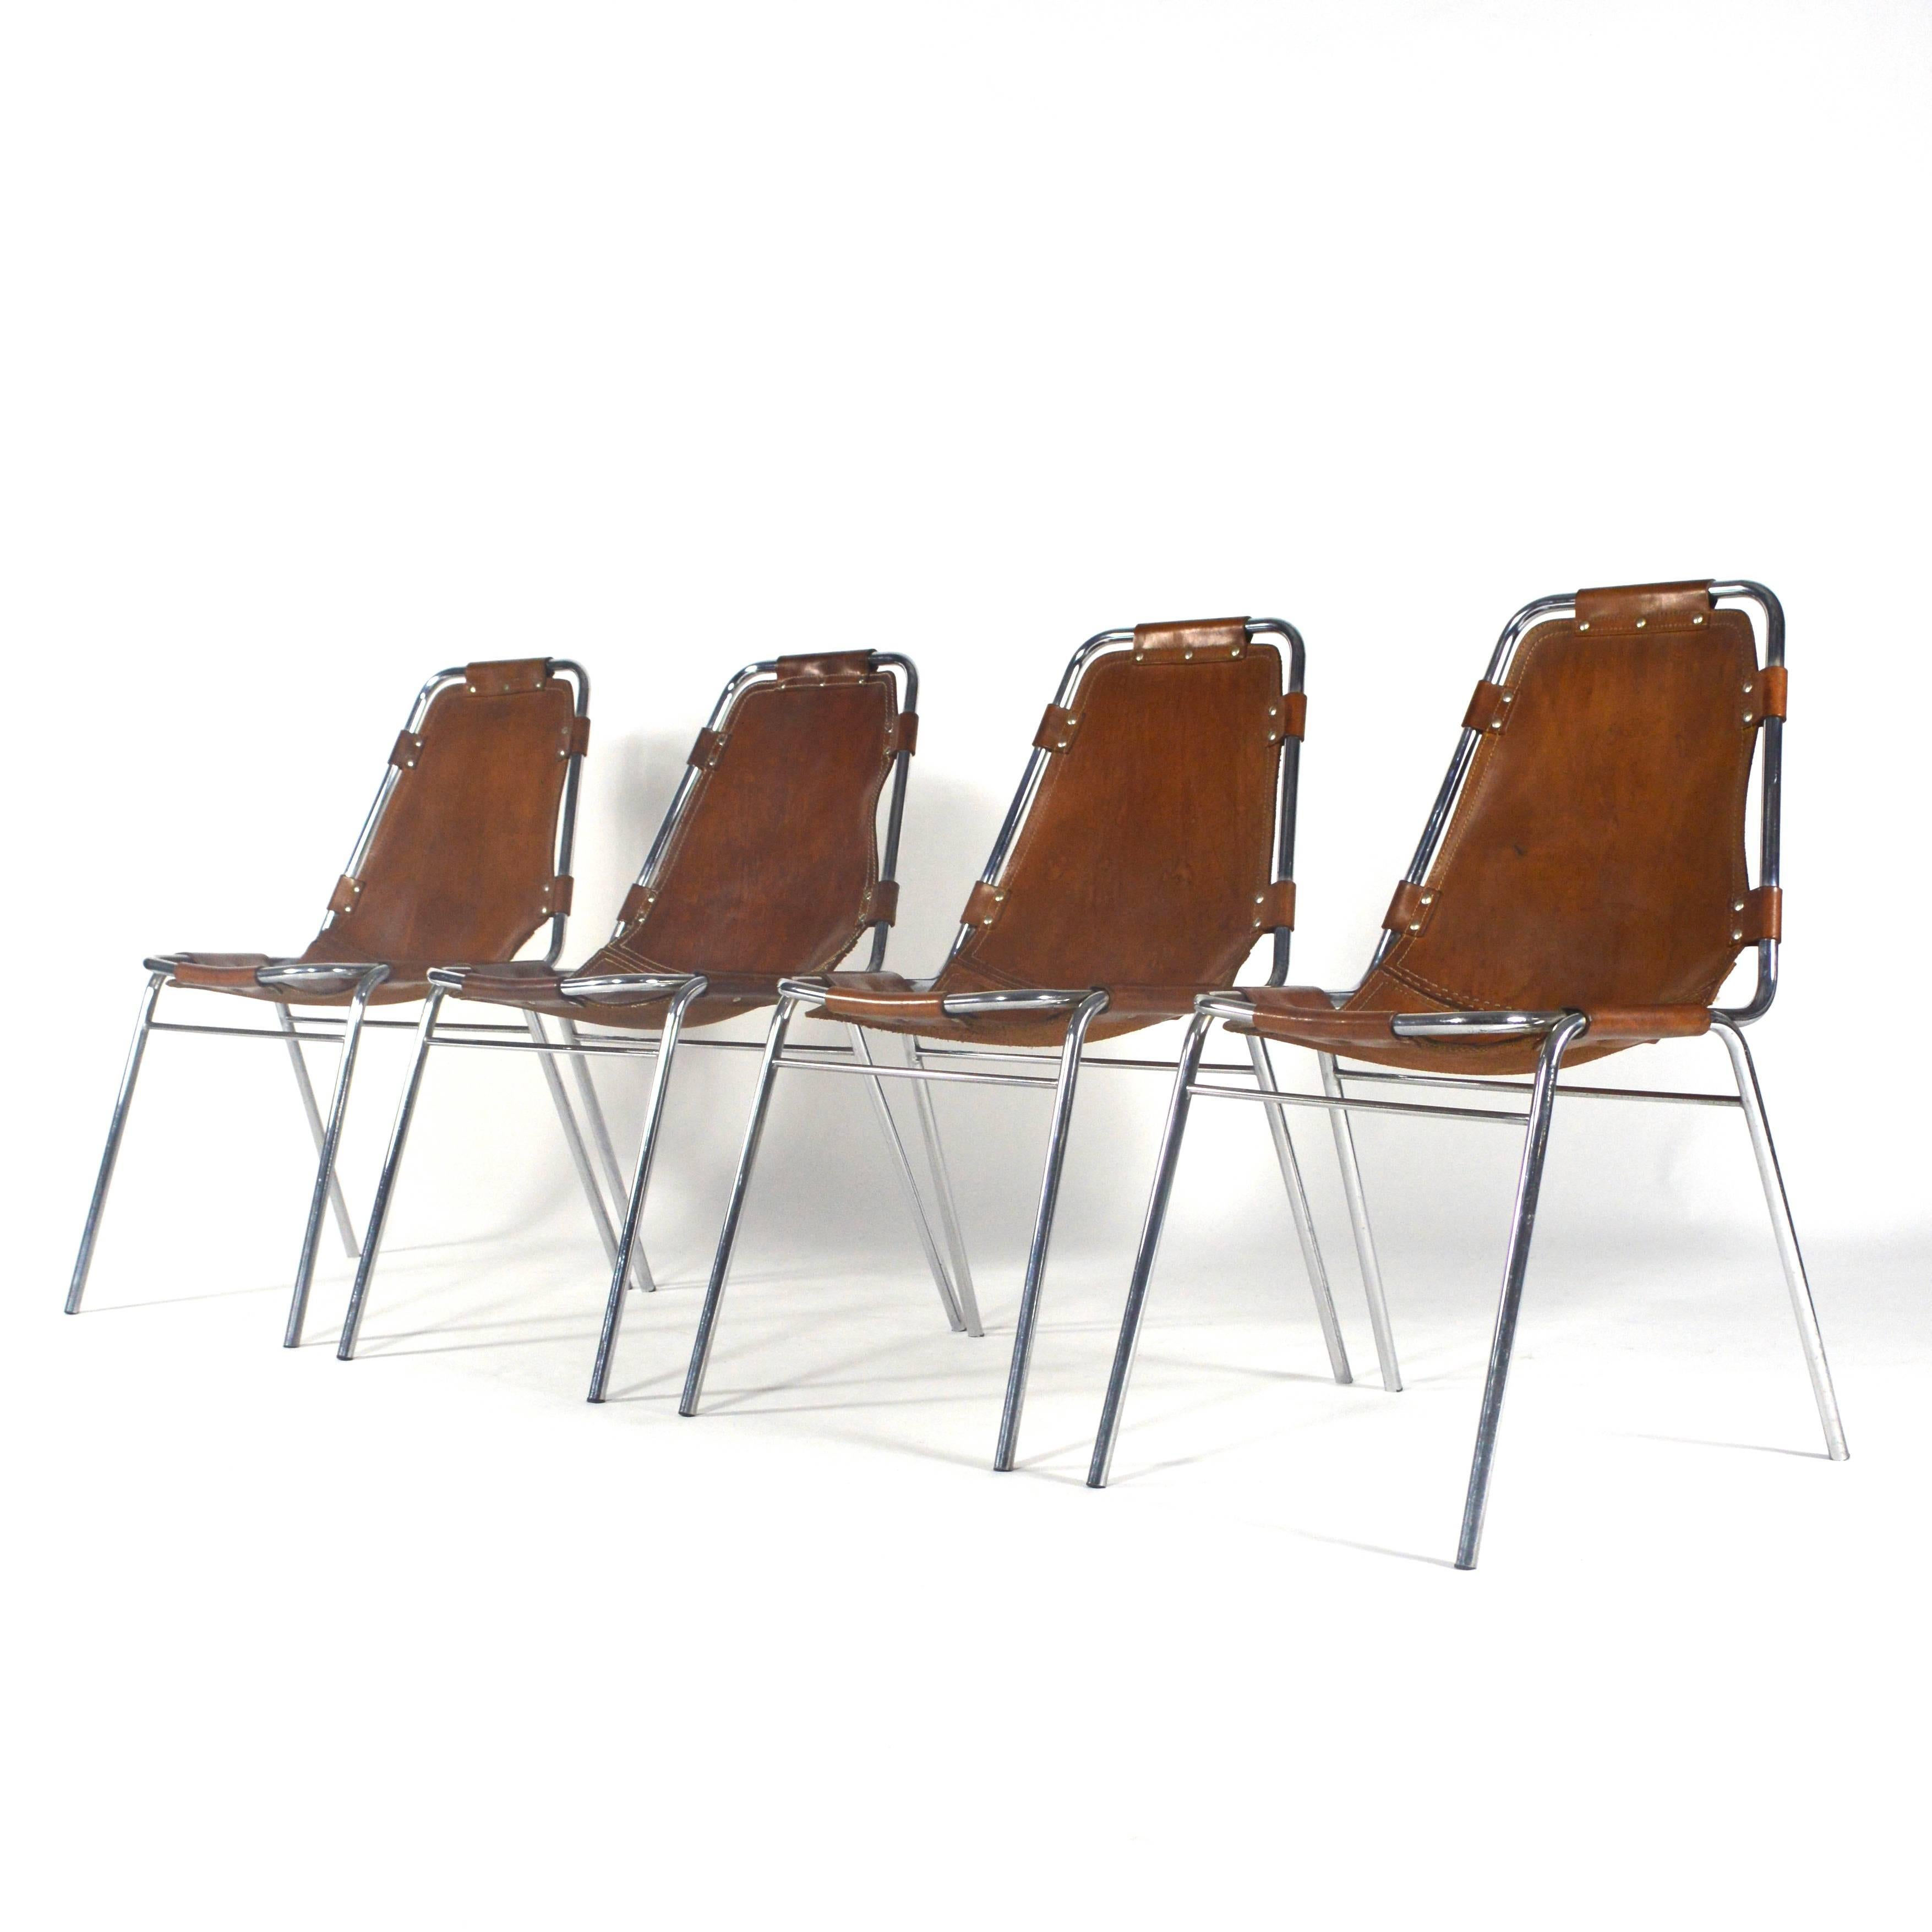 Mid-Century Modern Four Charlotte Perriand 'Les Arcs' Chairs, France, 1960s